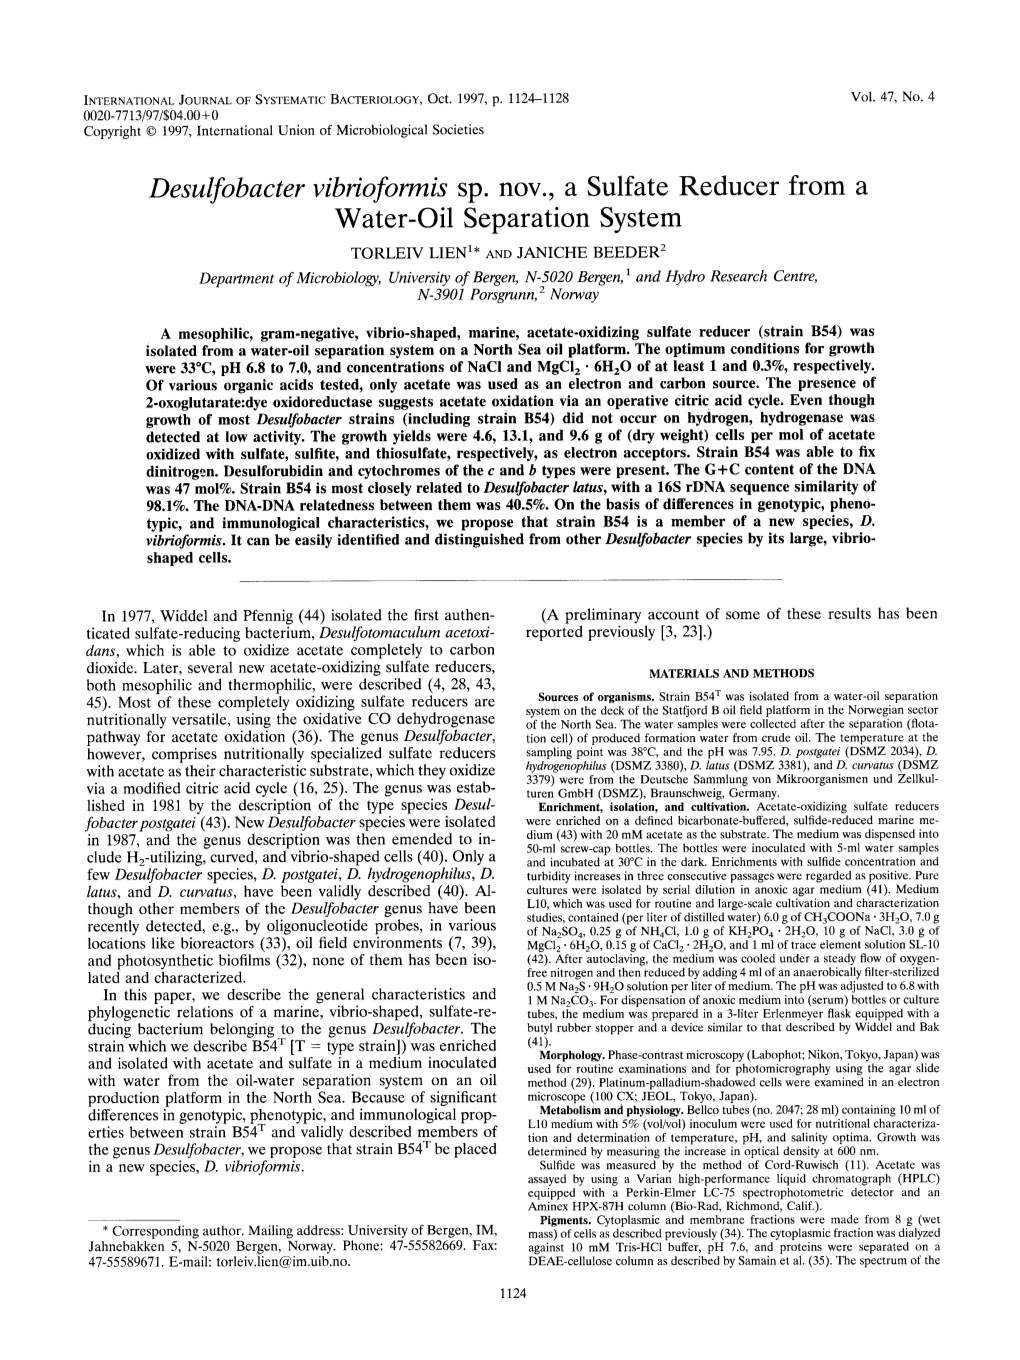 Desulfobacter Vibrioformis Sp. Nov., a Sulfate Reducer from a Water-Oil Separation System